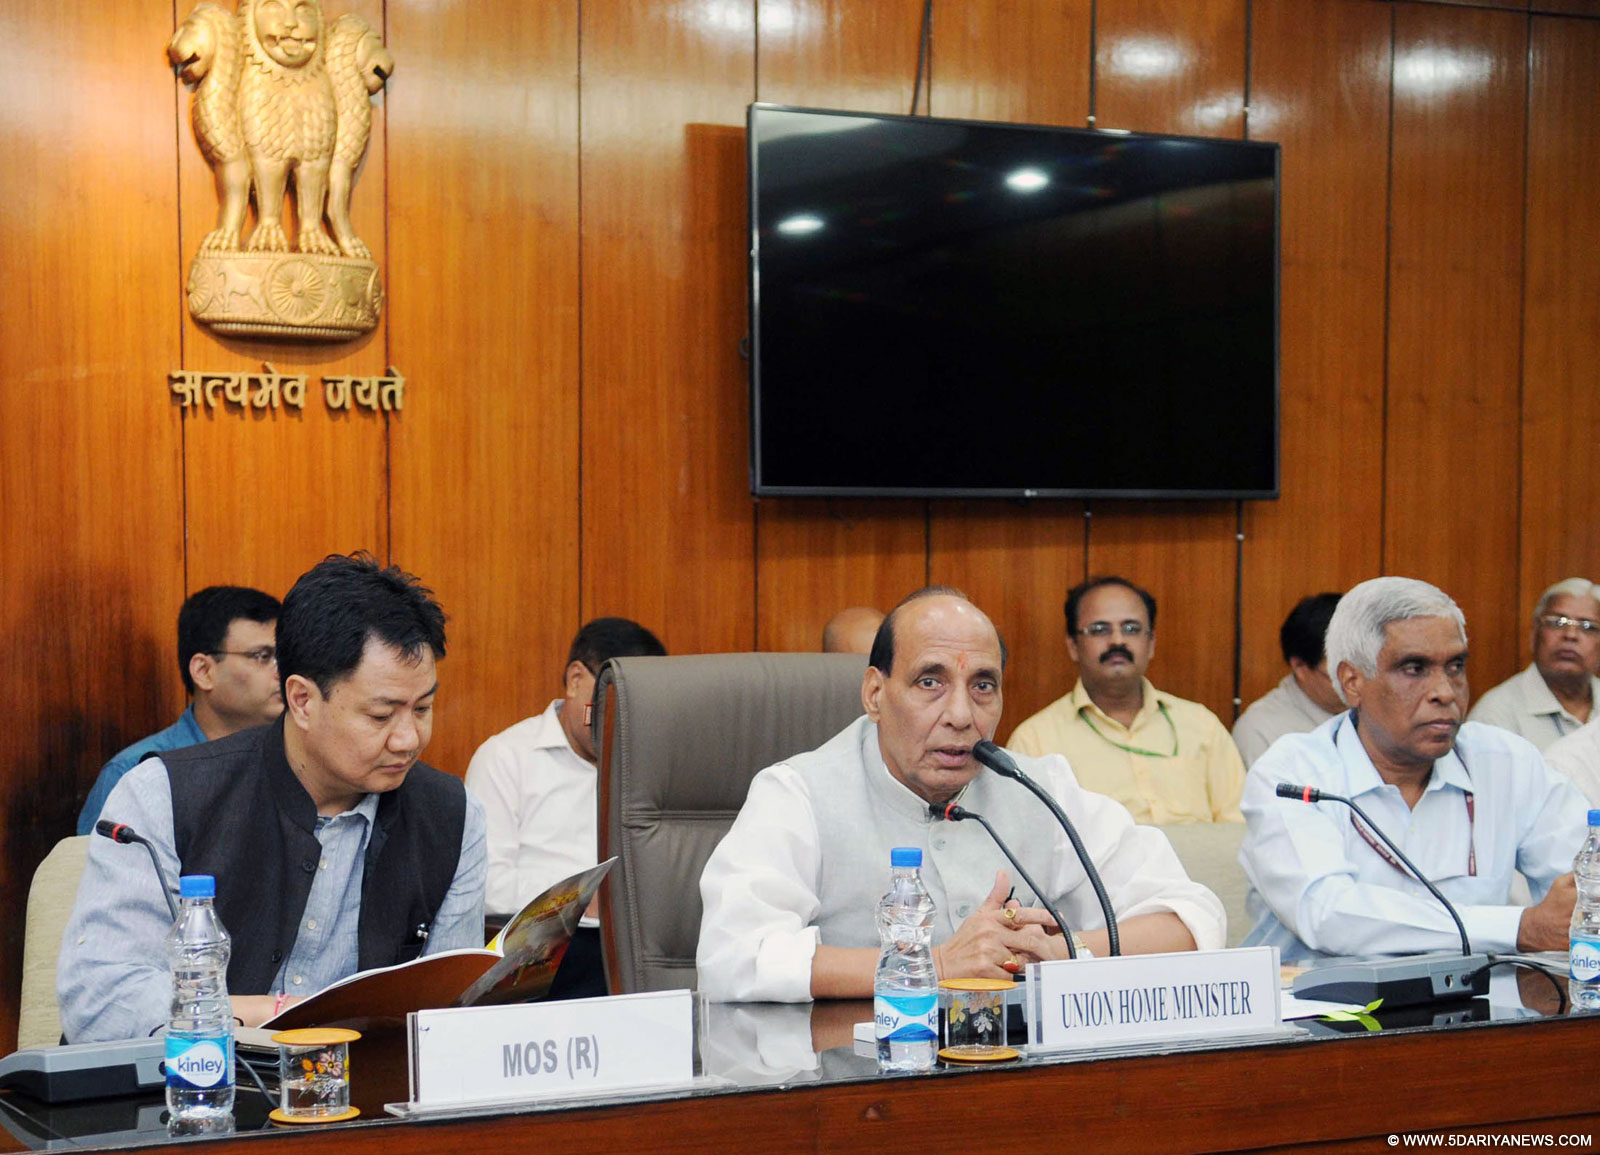 The Union Home Minister, Shri Rajnath Singh addressing at the release of a graphic booklet the saga of valour and sacrifice of CRPF at the Sardar Post, in New Delhi on September 24, 2015. The Minister of State for Home Affairs, Shri Kiren Rijiju is also seen.